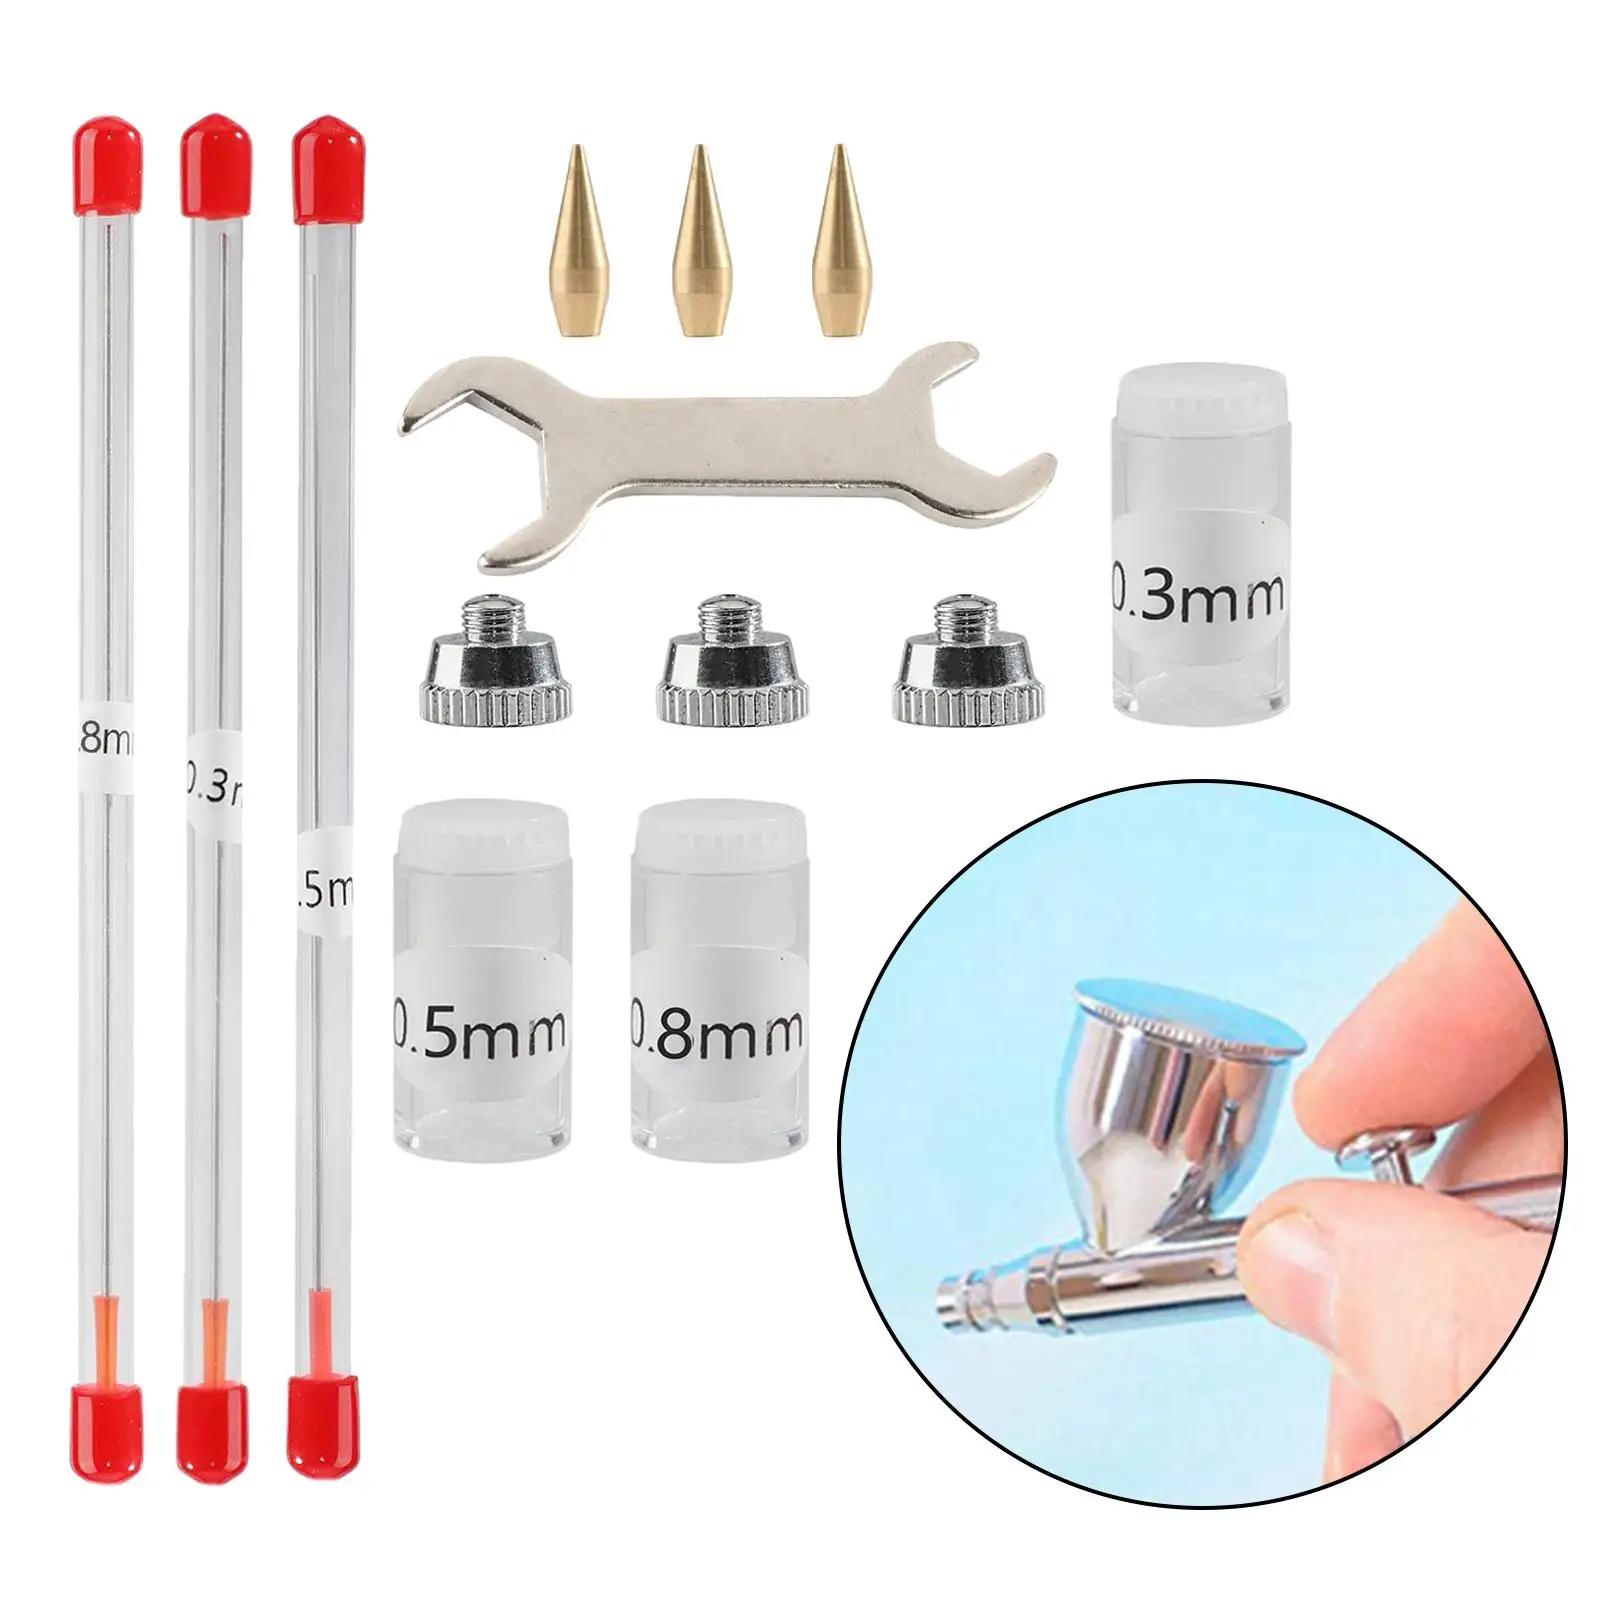 11x Airbrush Nozzle Kits Airbrush Sprayer Accessories Professional for Replacement Parts